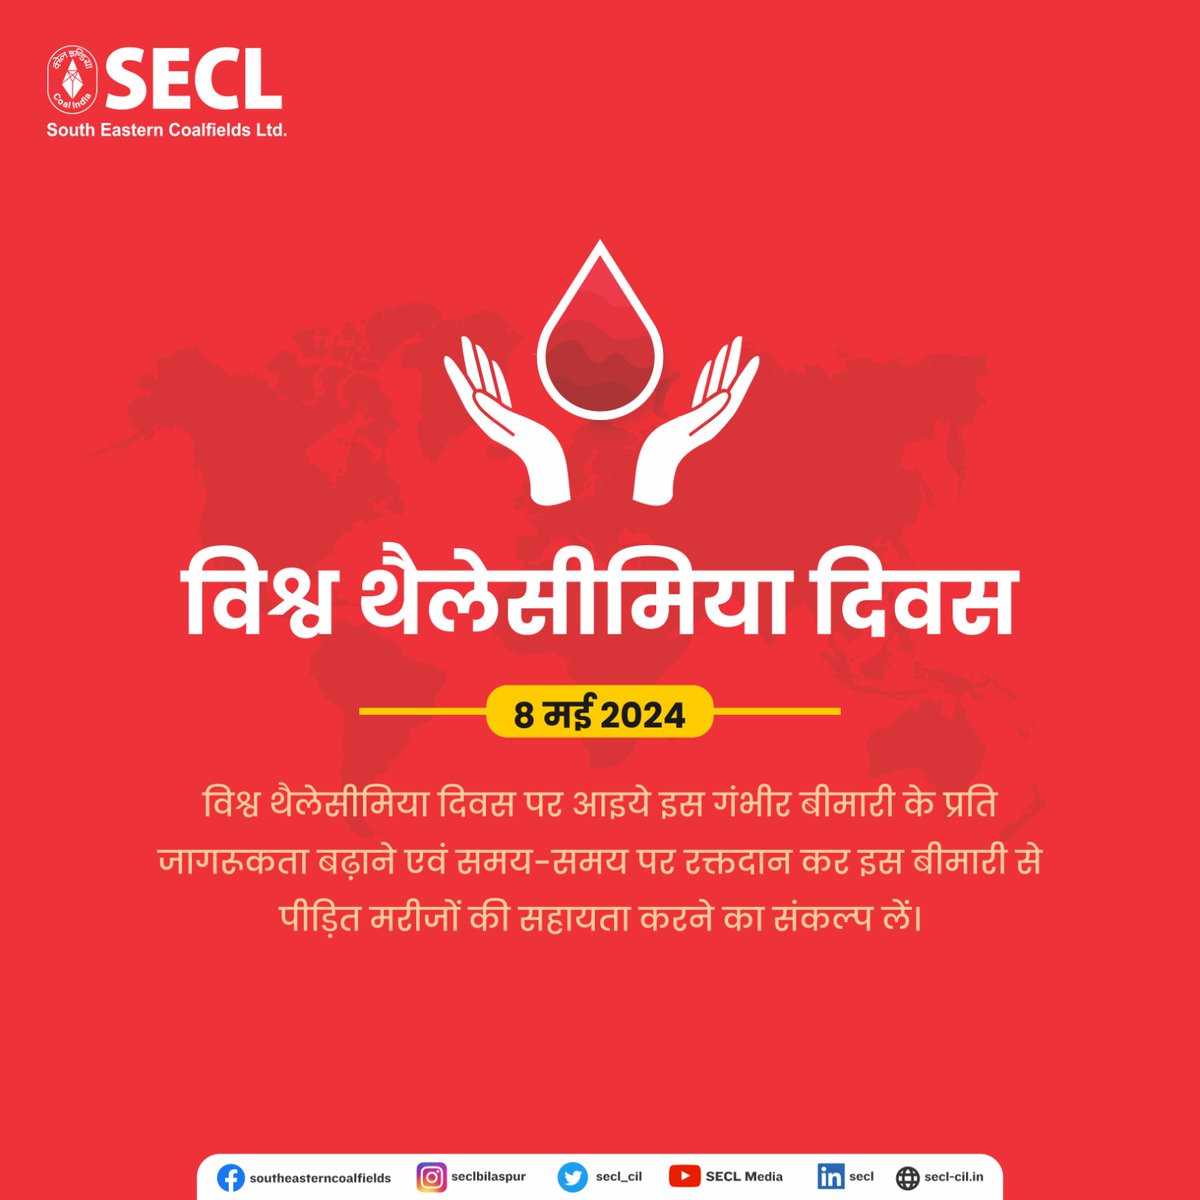 On #WorldThalassaemiaDay let us all join hands in spreading awareness of the disease and regularly donate blood to help thalassemia patients. @CoalMinistry @CoalIndiaHQ #teamsecl #coalindia